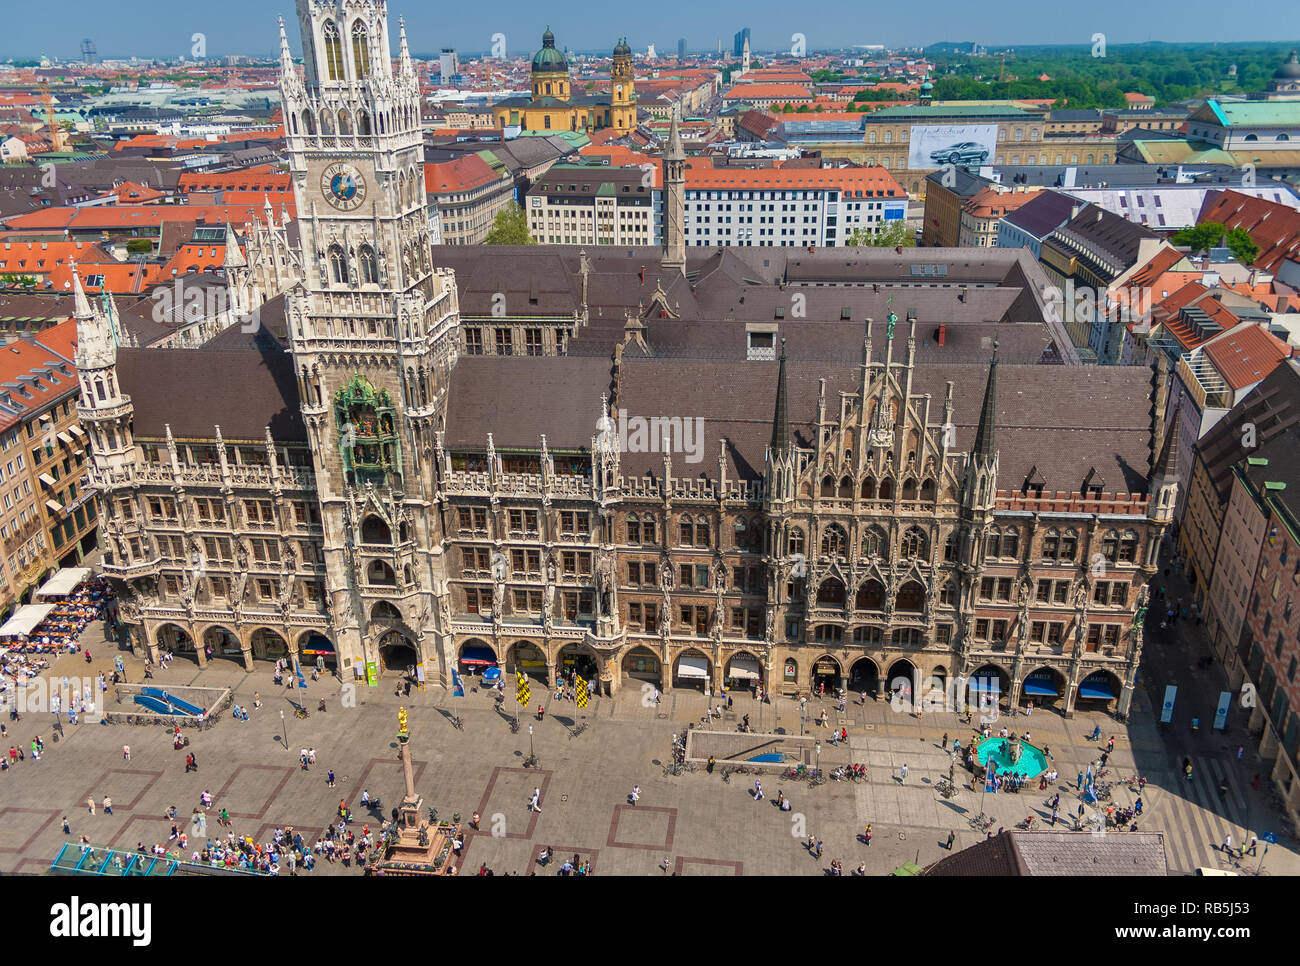 Great aerial view of Munich's New Town Hall (Neues Rathaus) and Mary's Square (Marienplatz), the popular pedestrian zone with the Marian column... Stock Photo